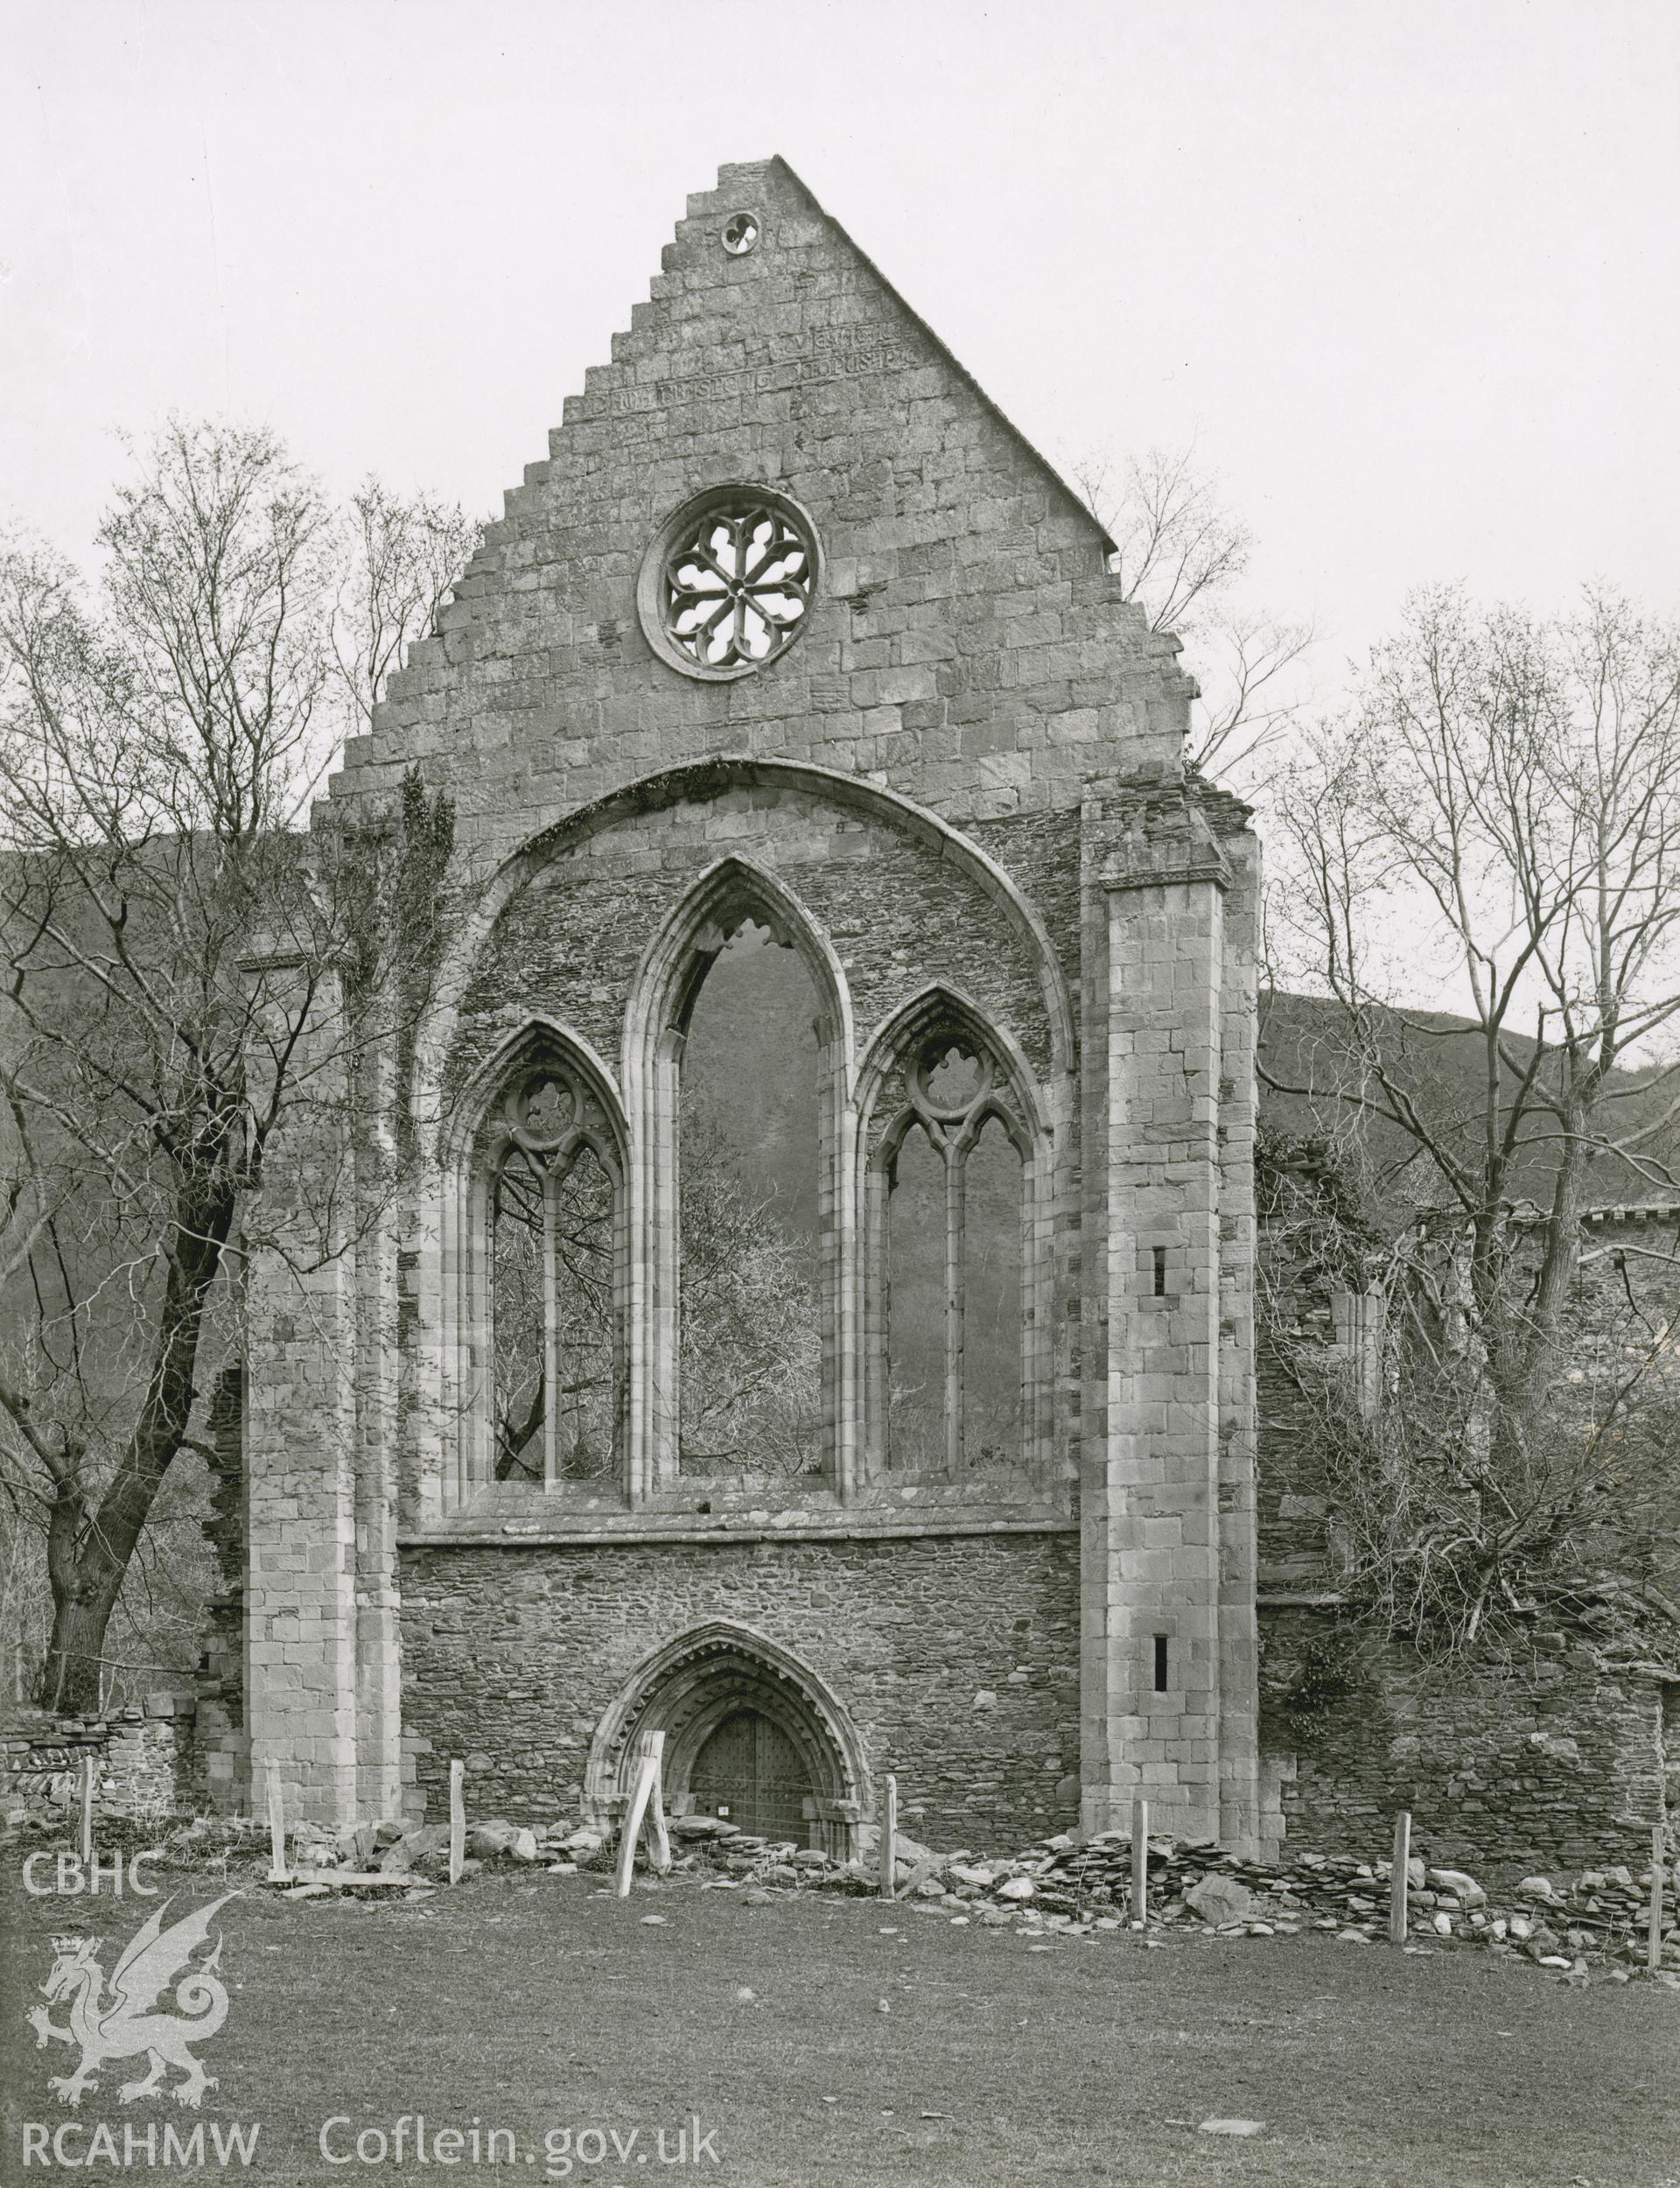 Digitised copy of a black and white print showing west front of church at Valle Crucis Abbey taken by F.H. Crossley, 1947. Negative held by NMR England.